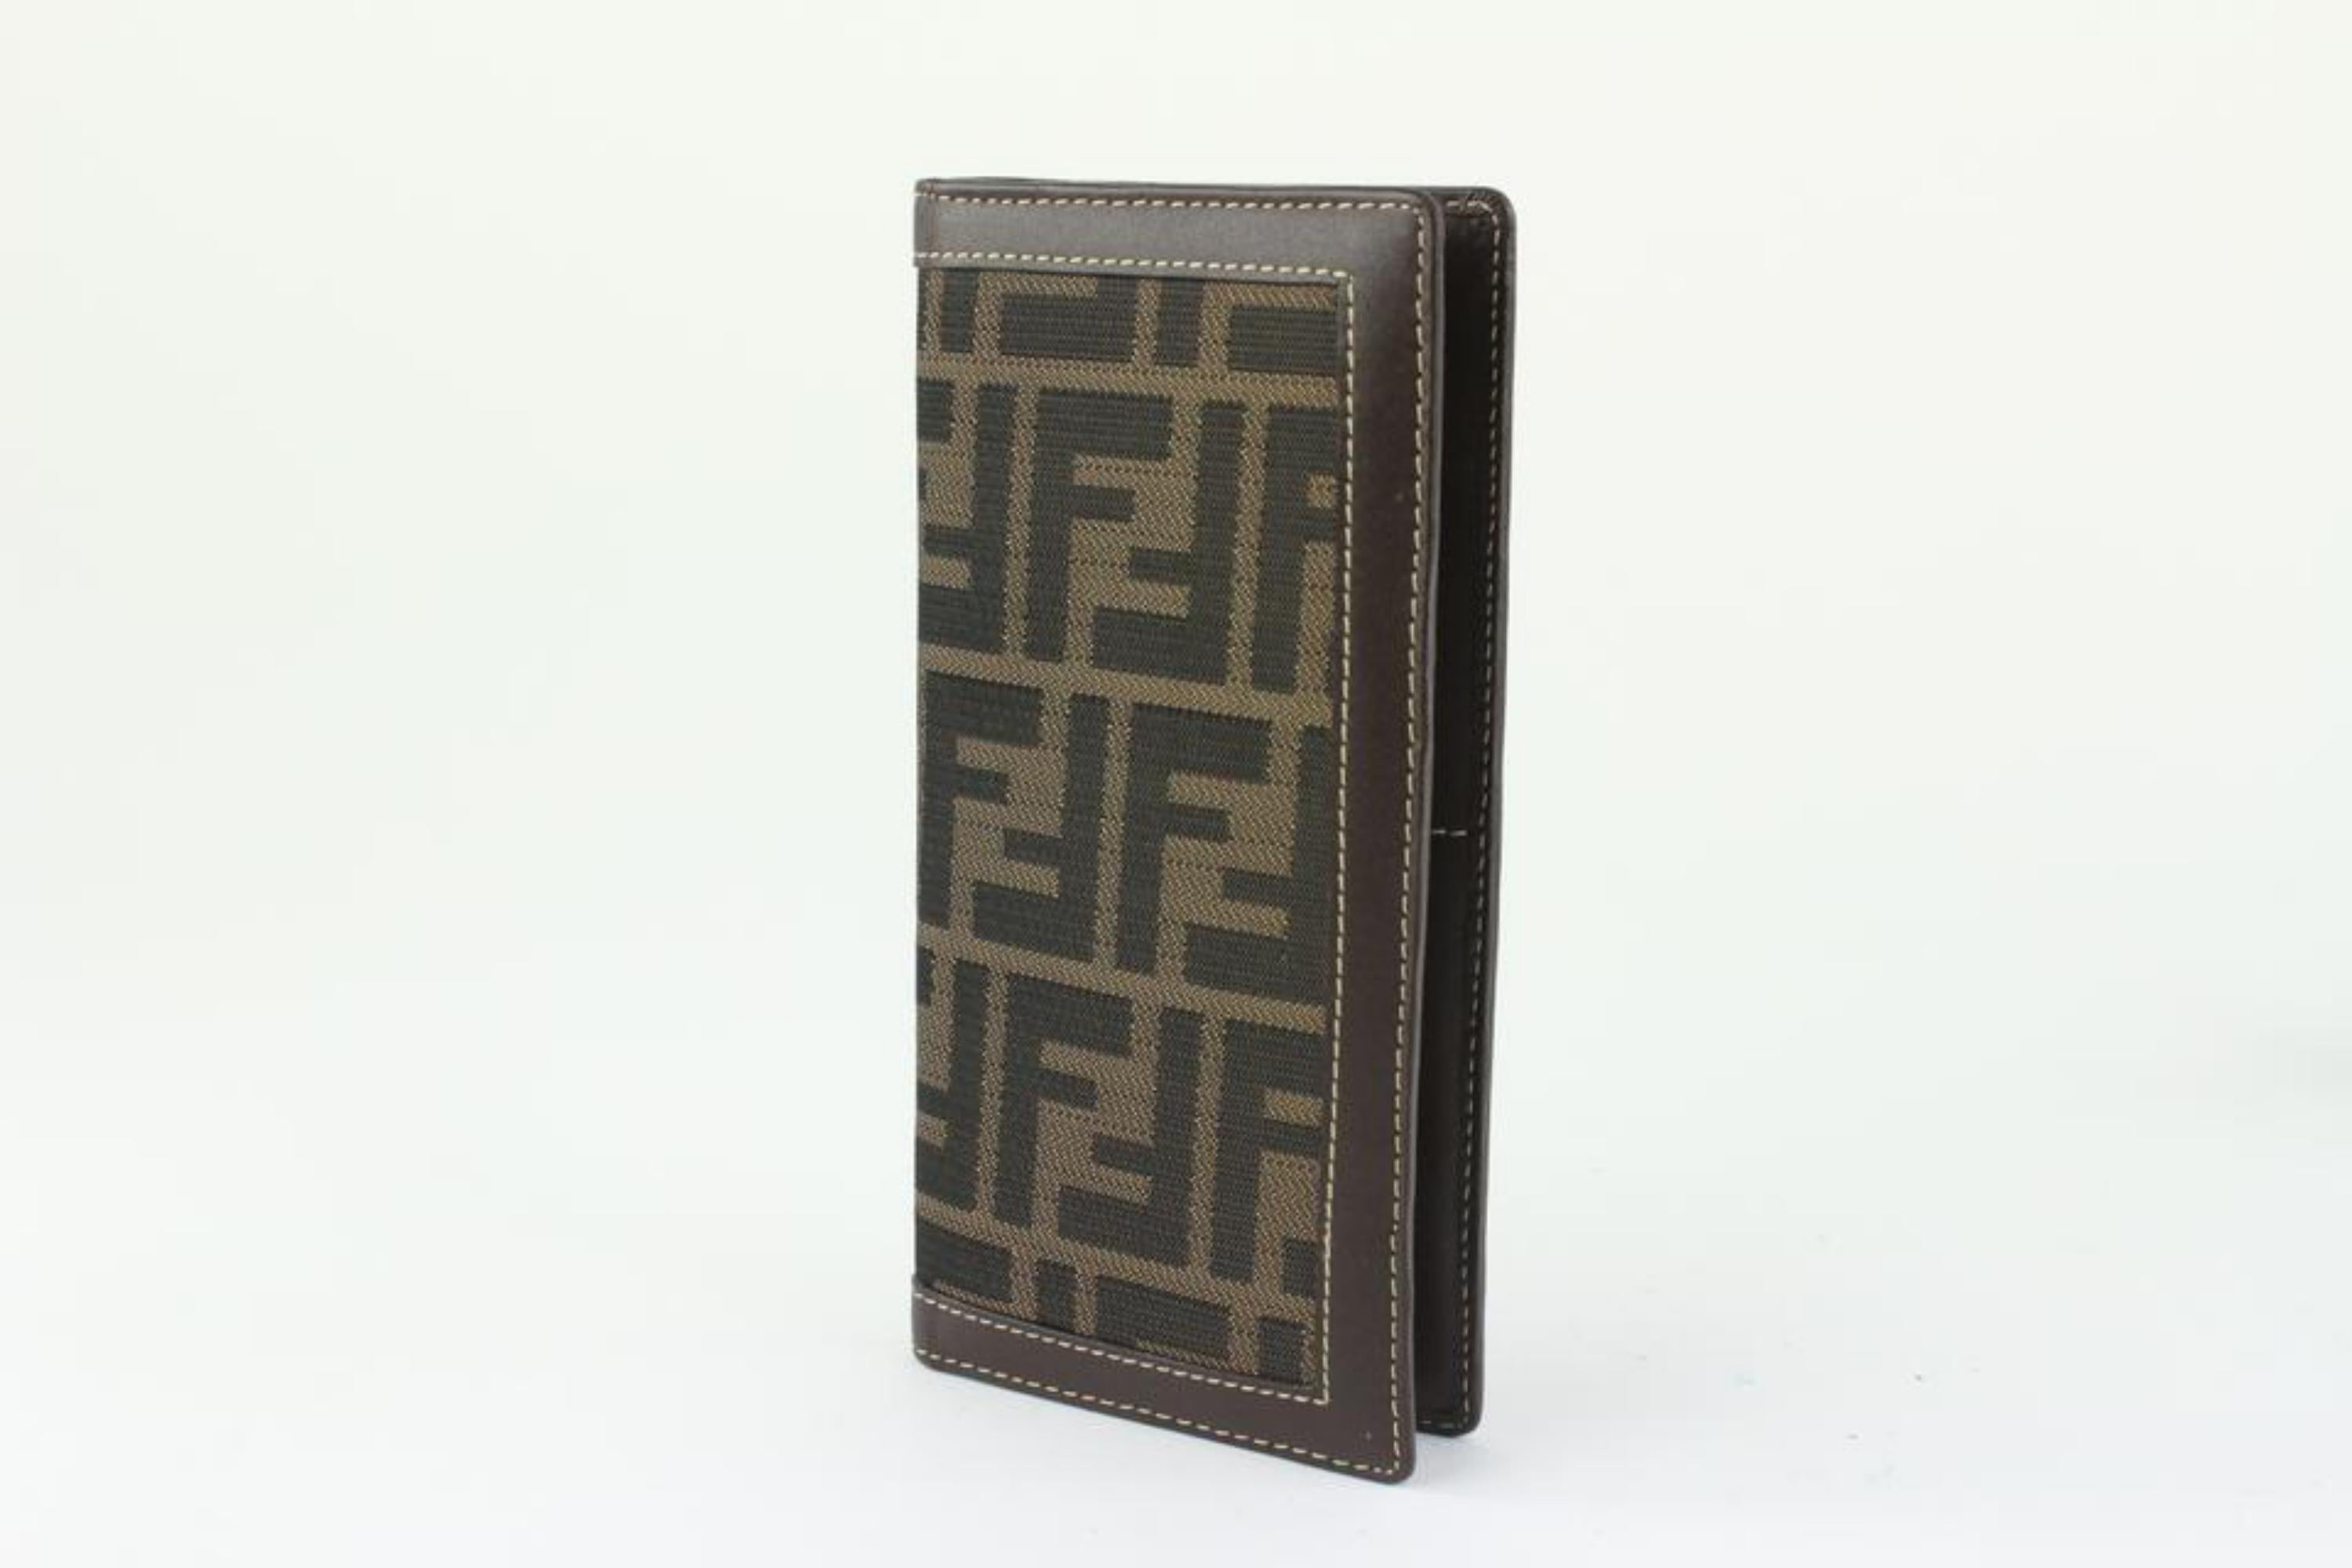 Fendi Brown Monogram FF Zucca Long Flap Wallet 1220f44
Made In: Italy
Measurements: Length:  3.5